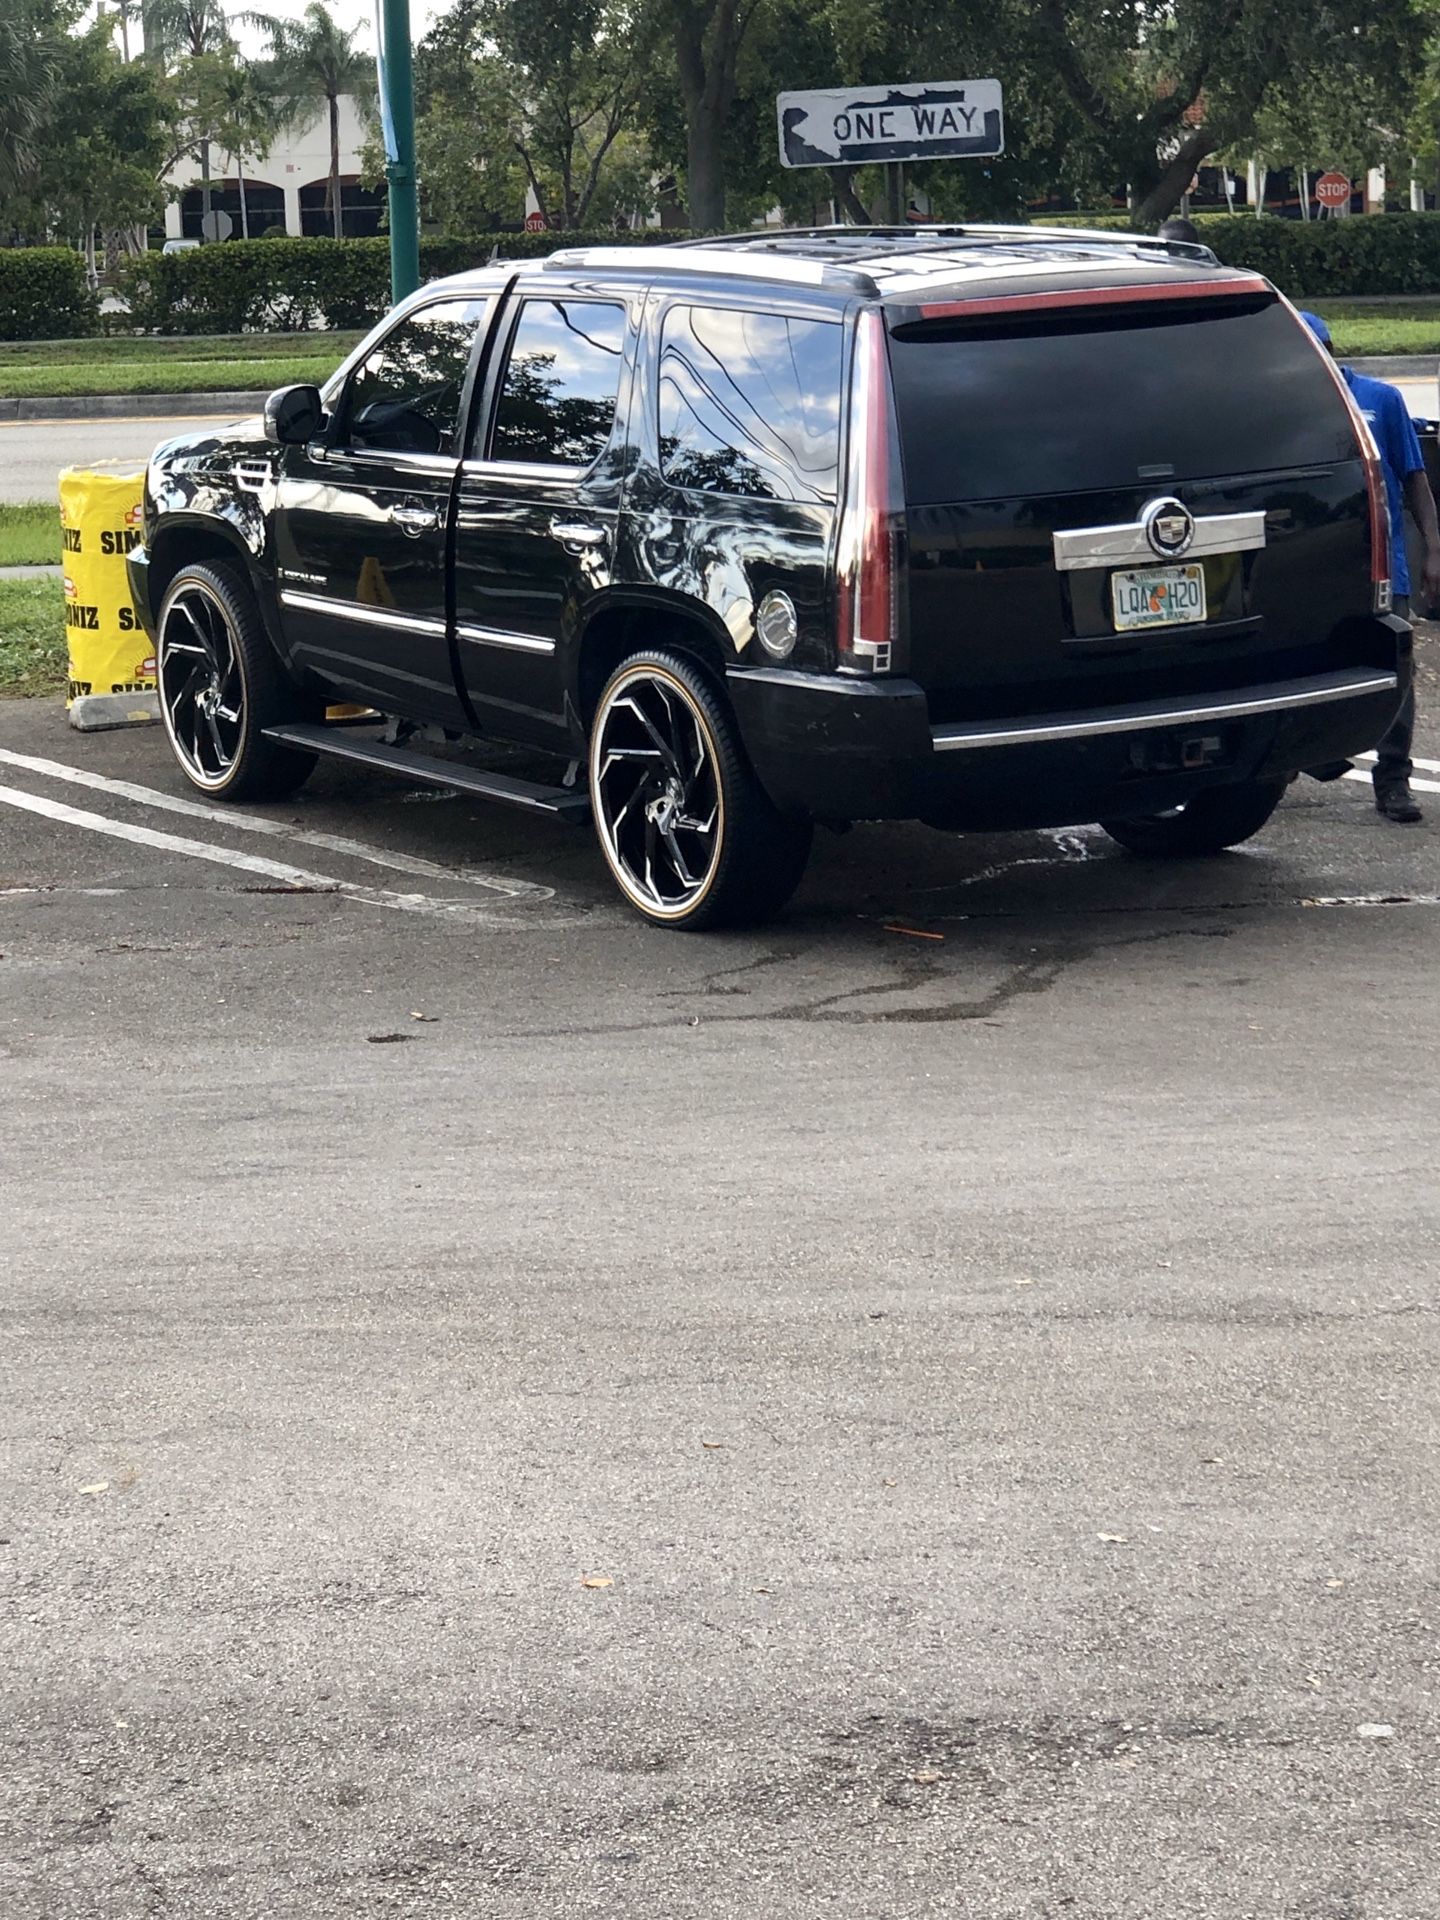 Cadillac Escalade 24”inch Lexani rims and tires vogues MAJOR PRICE DROPPP FIRST 1600$ TAKES THEM THIS WEEKEND ONLY